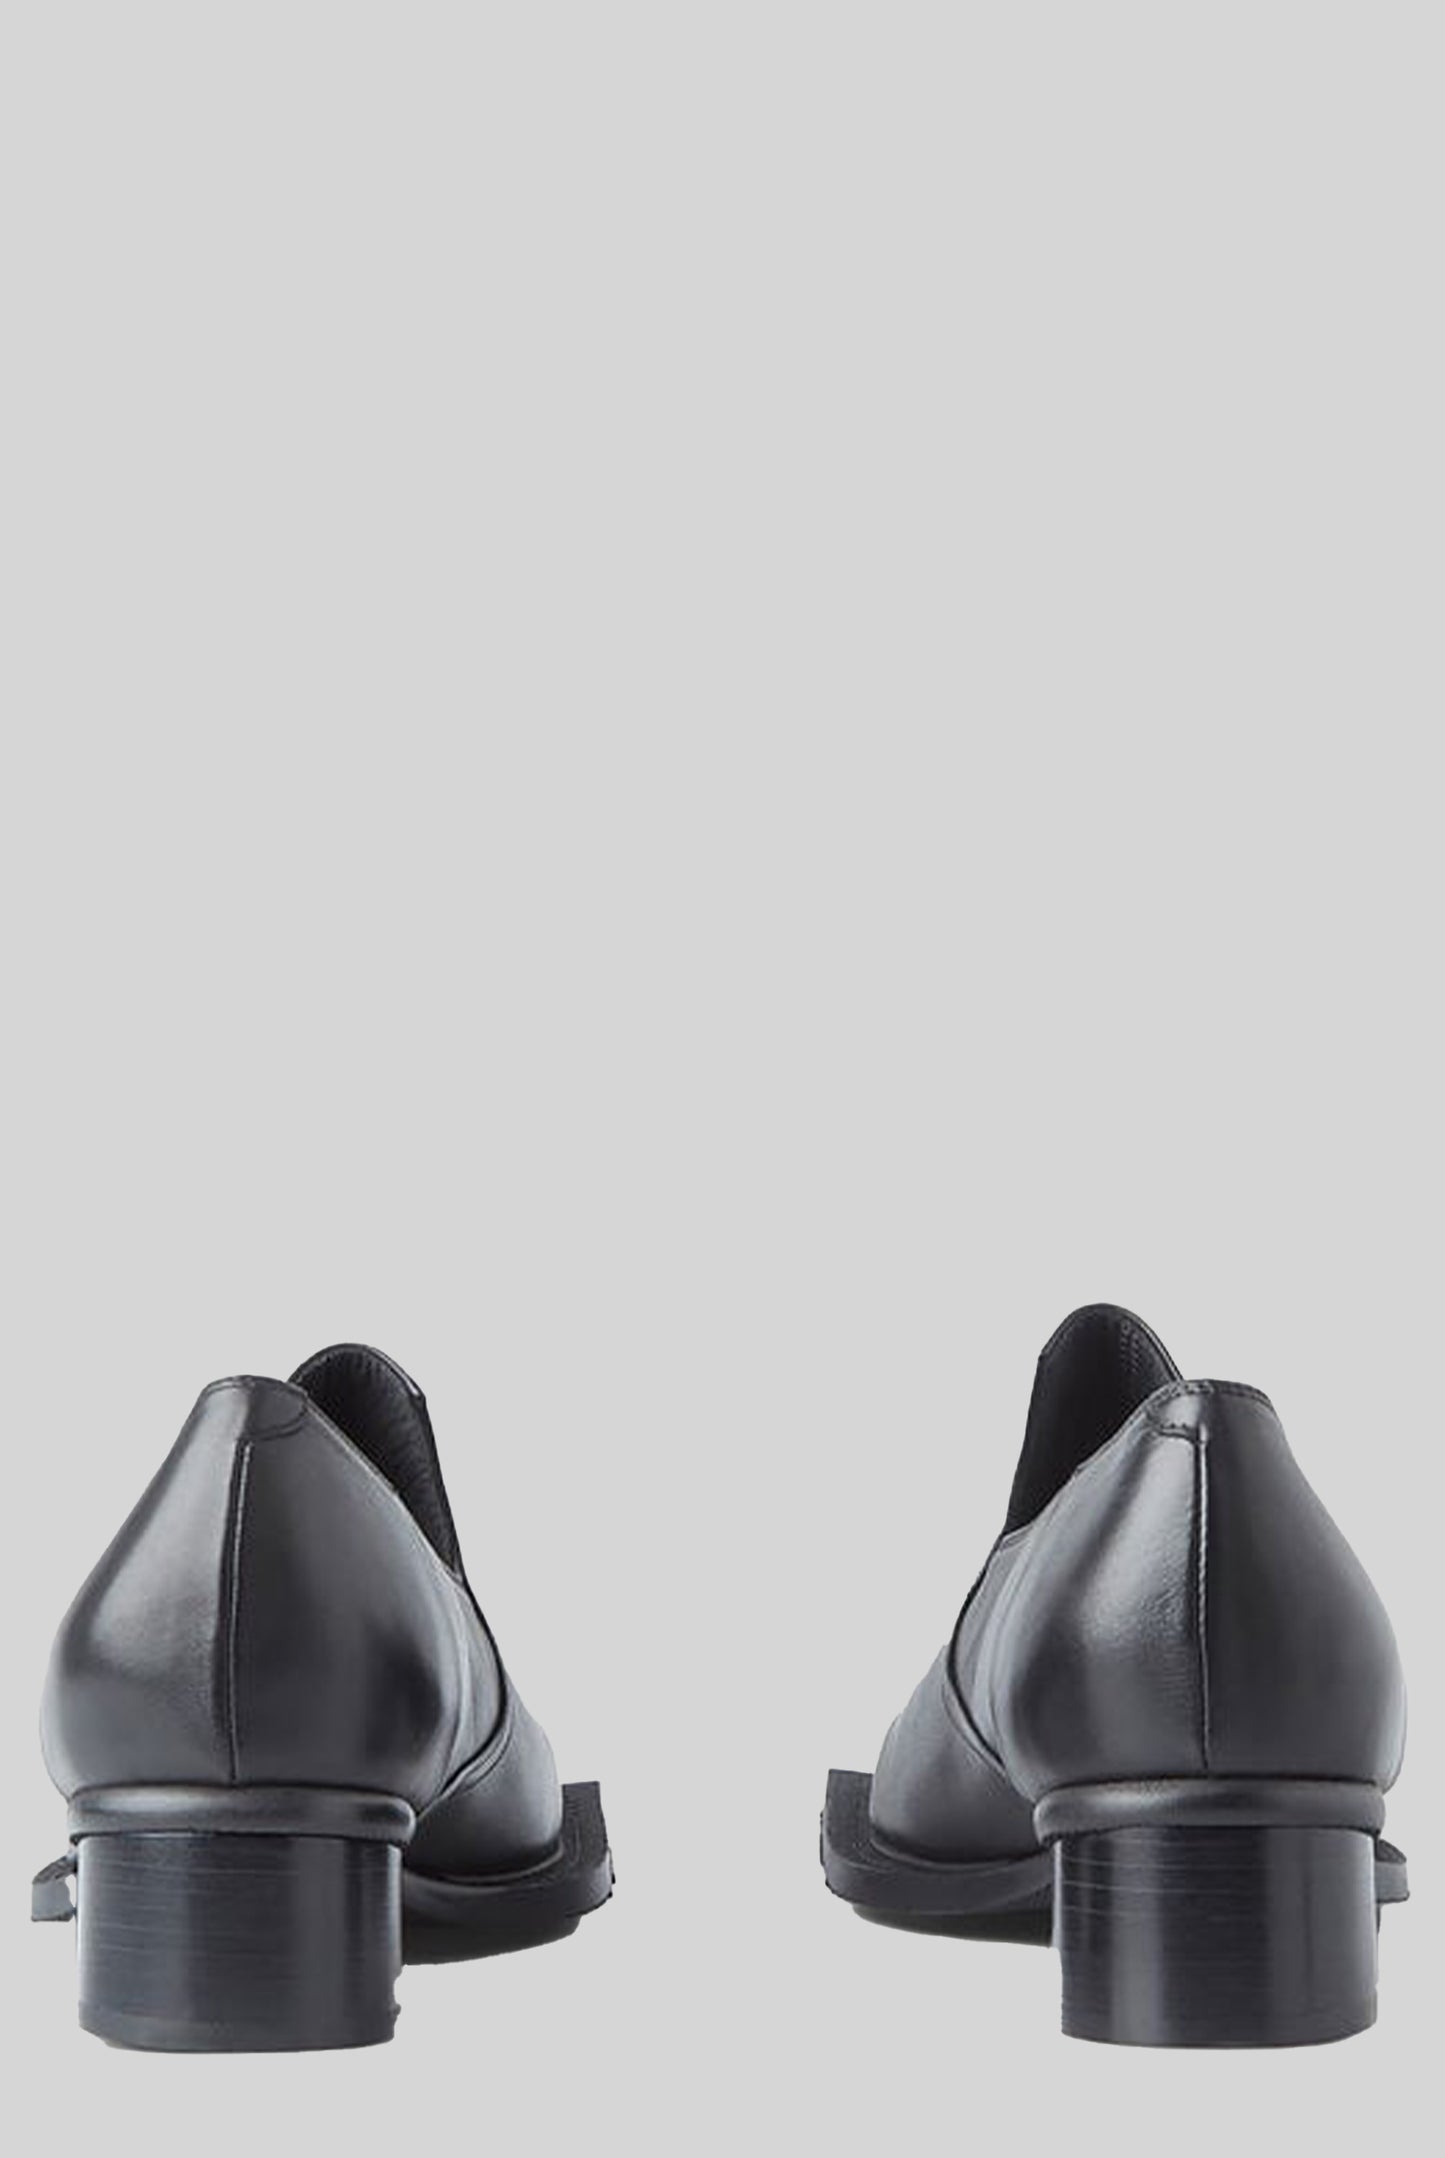 Howled Loafers in Black